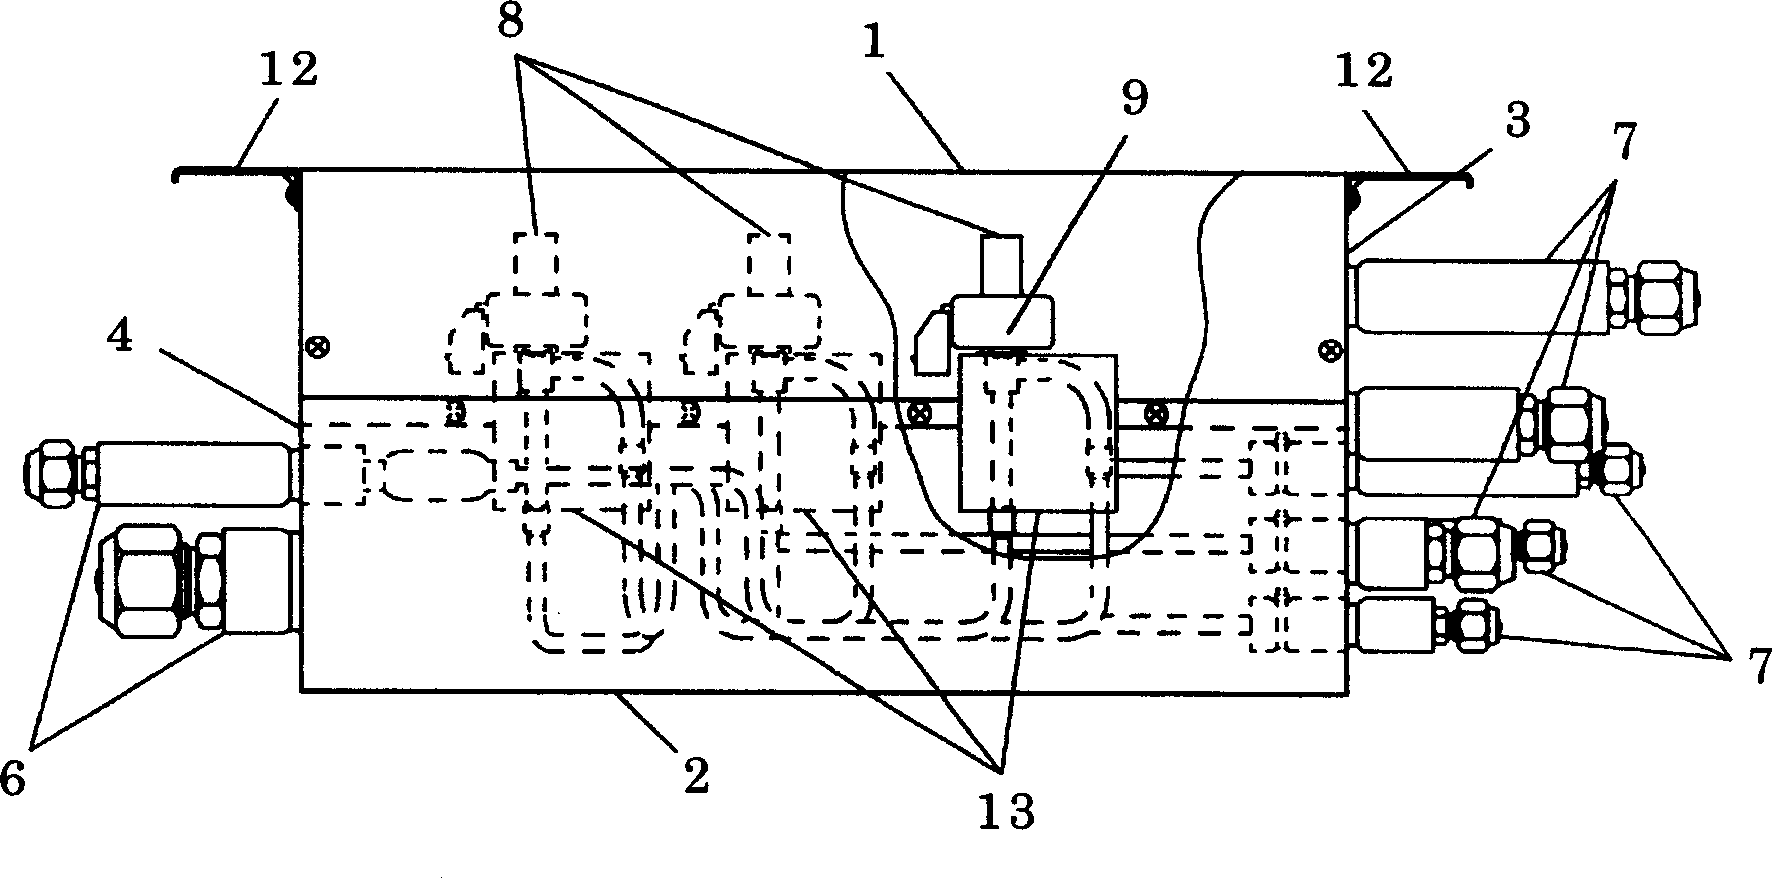 Flow path shunting device